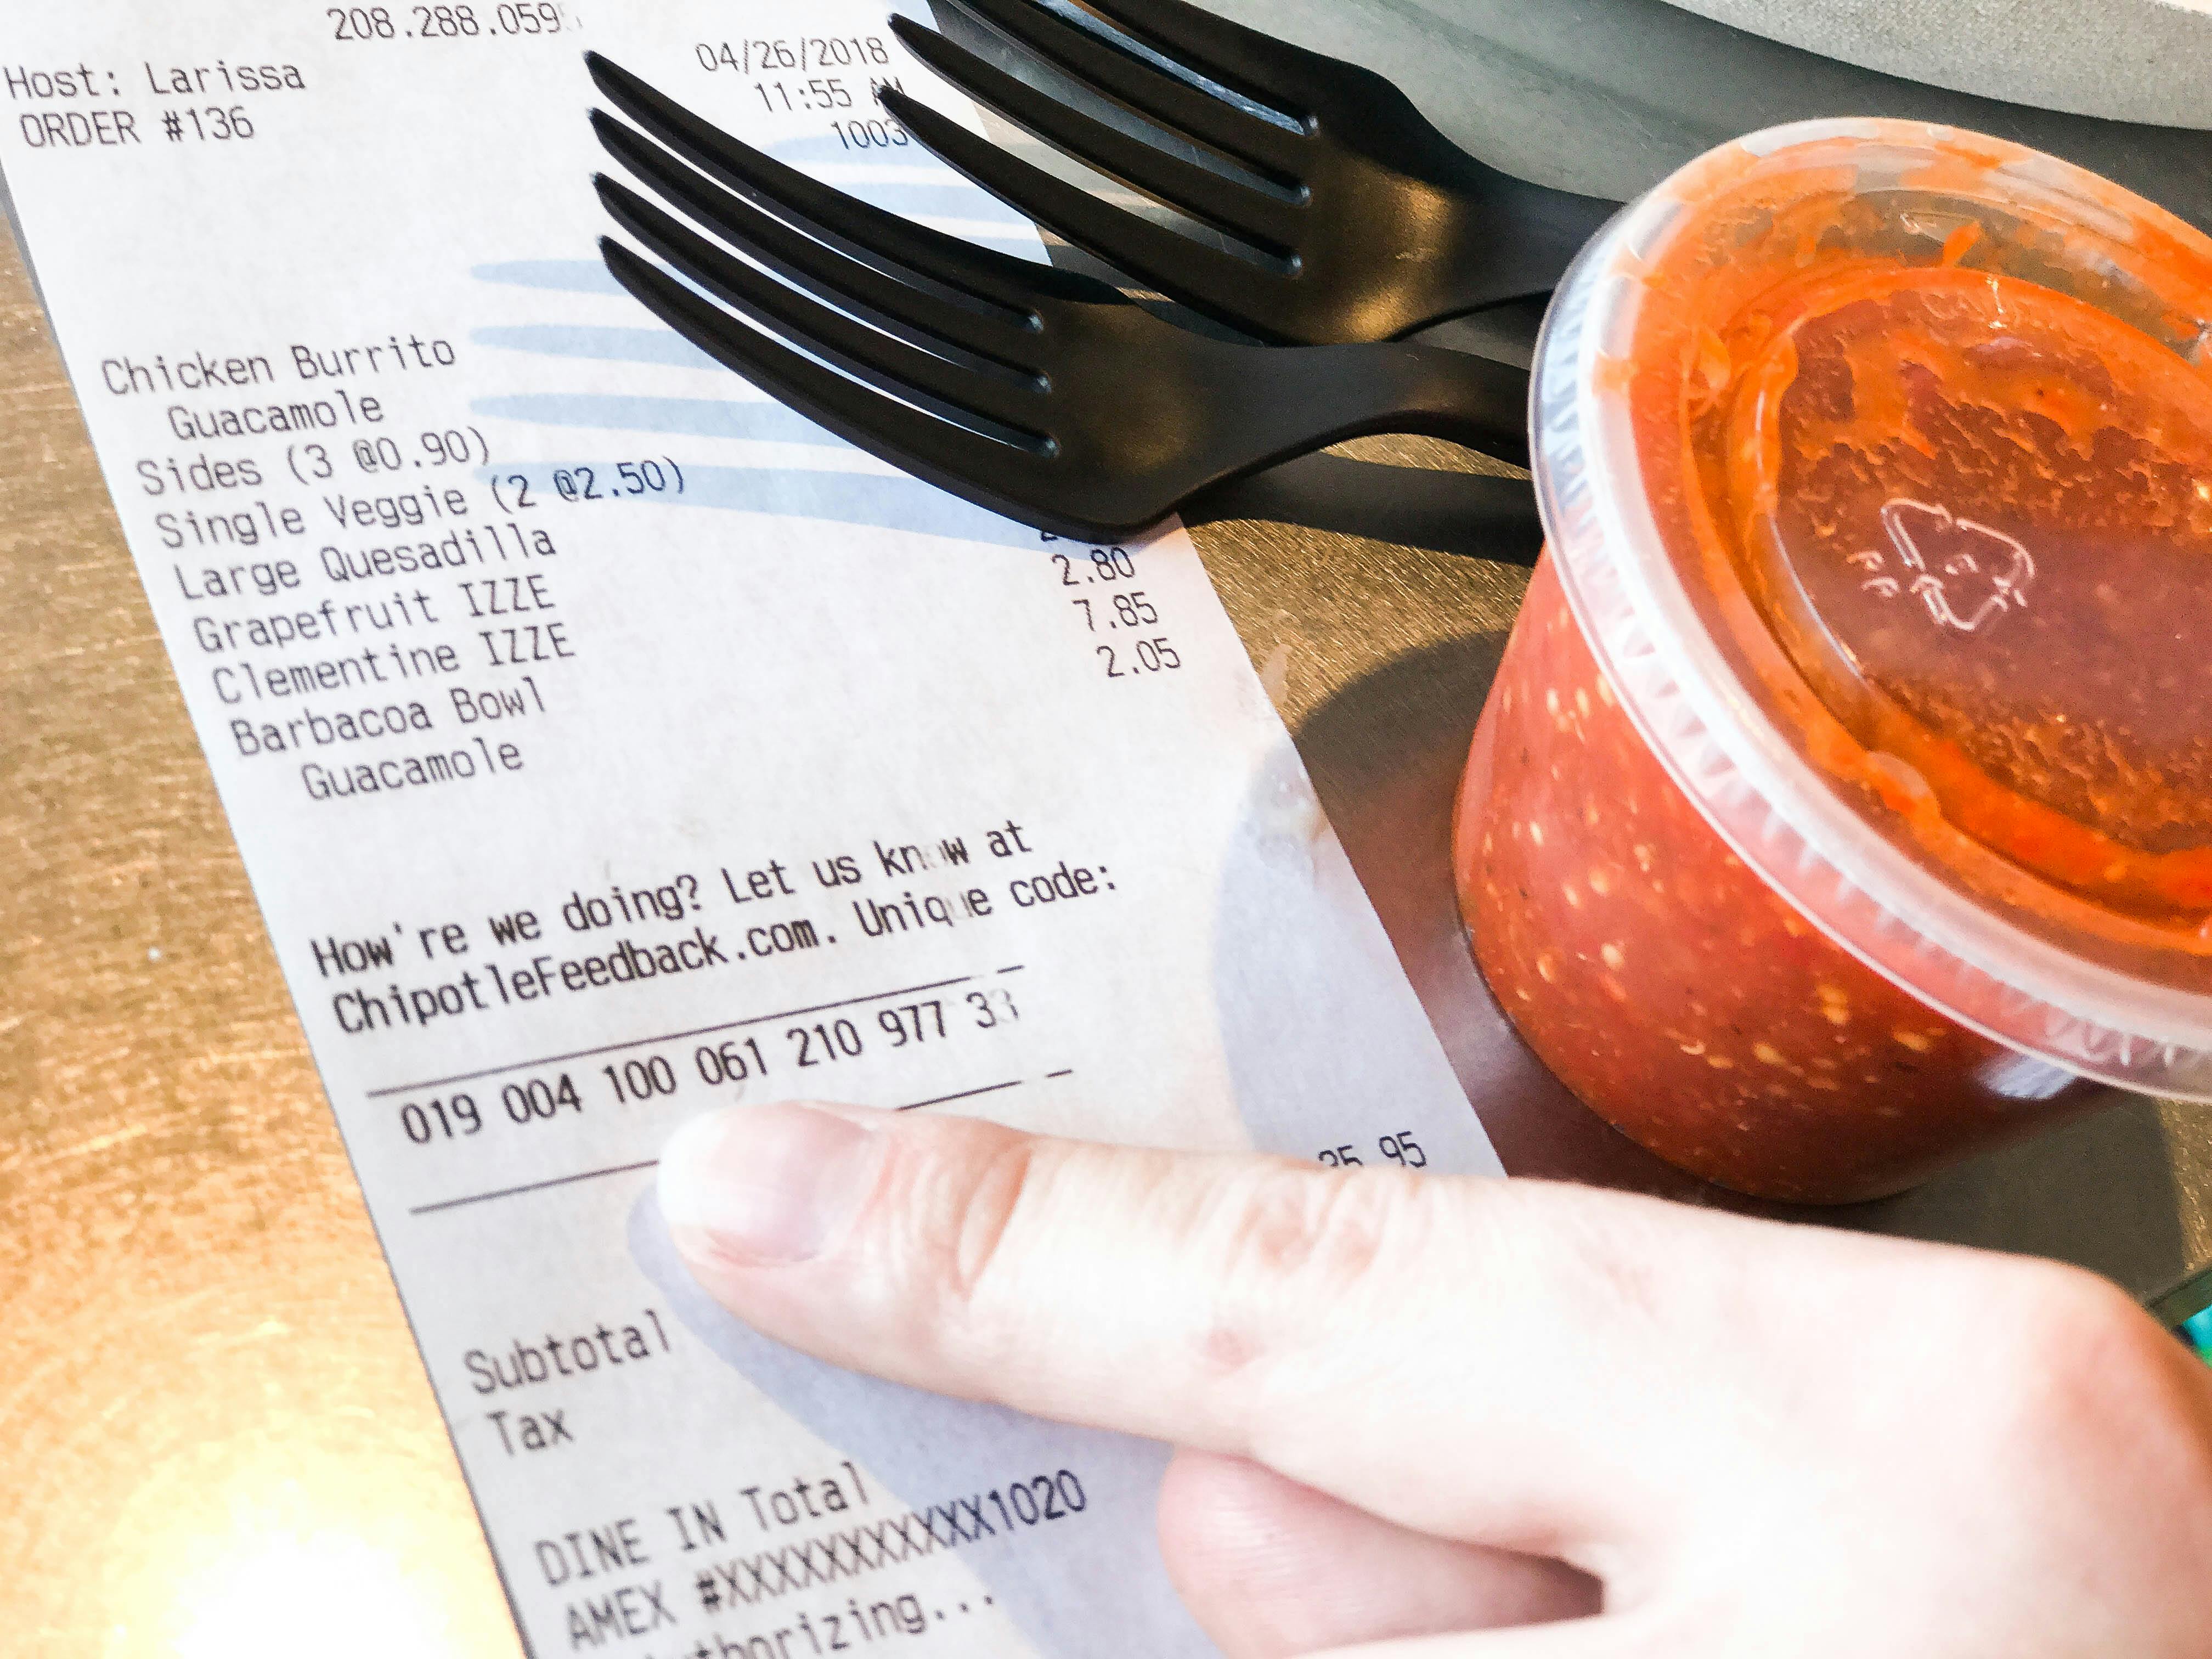 How to Get Free Chipotle, Plus Rewards & Hacks The Krazy Coupon Lady